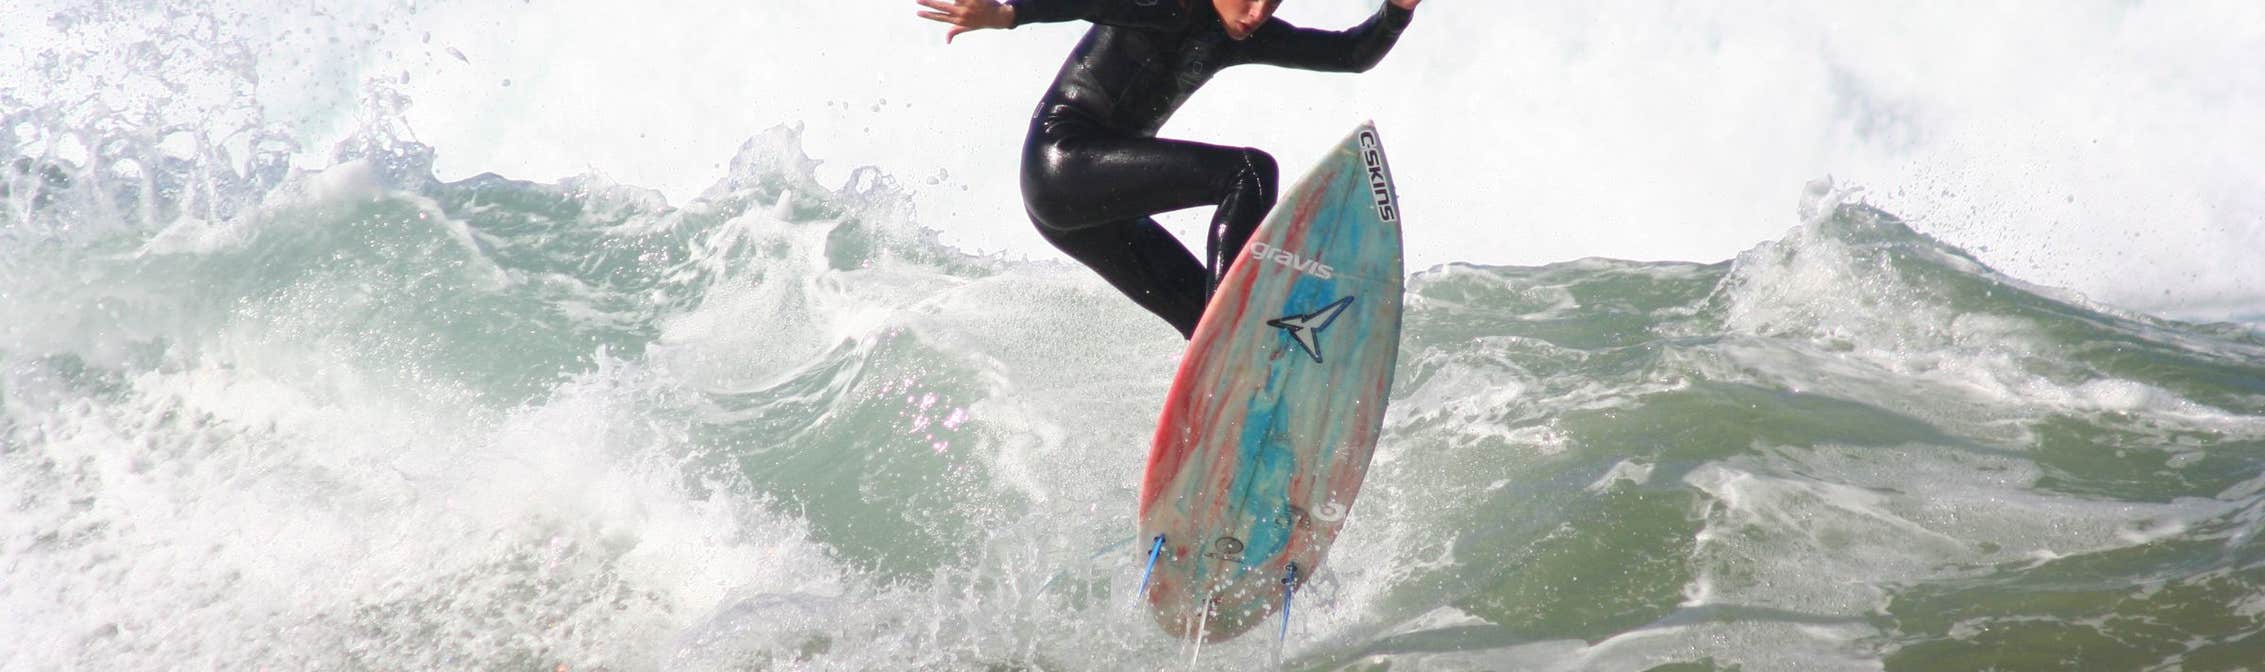 Surfer in Louisburgh in County Mayo